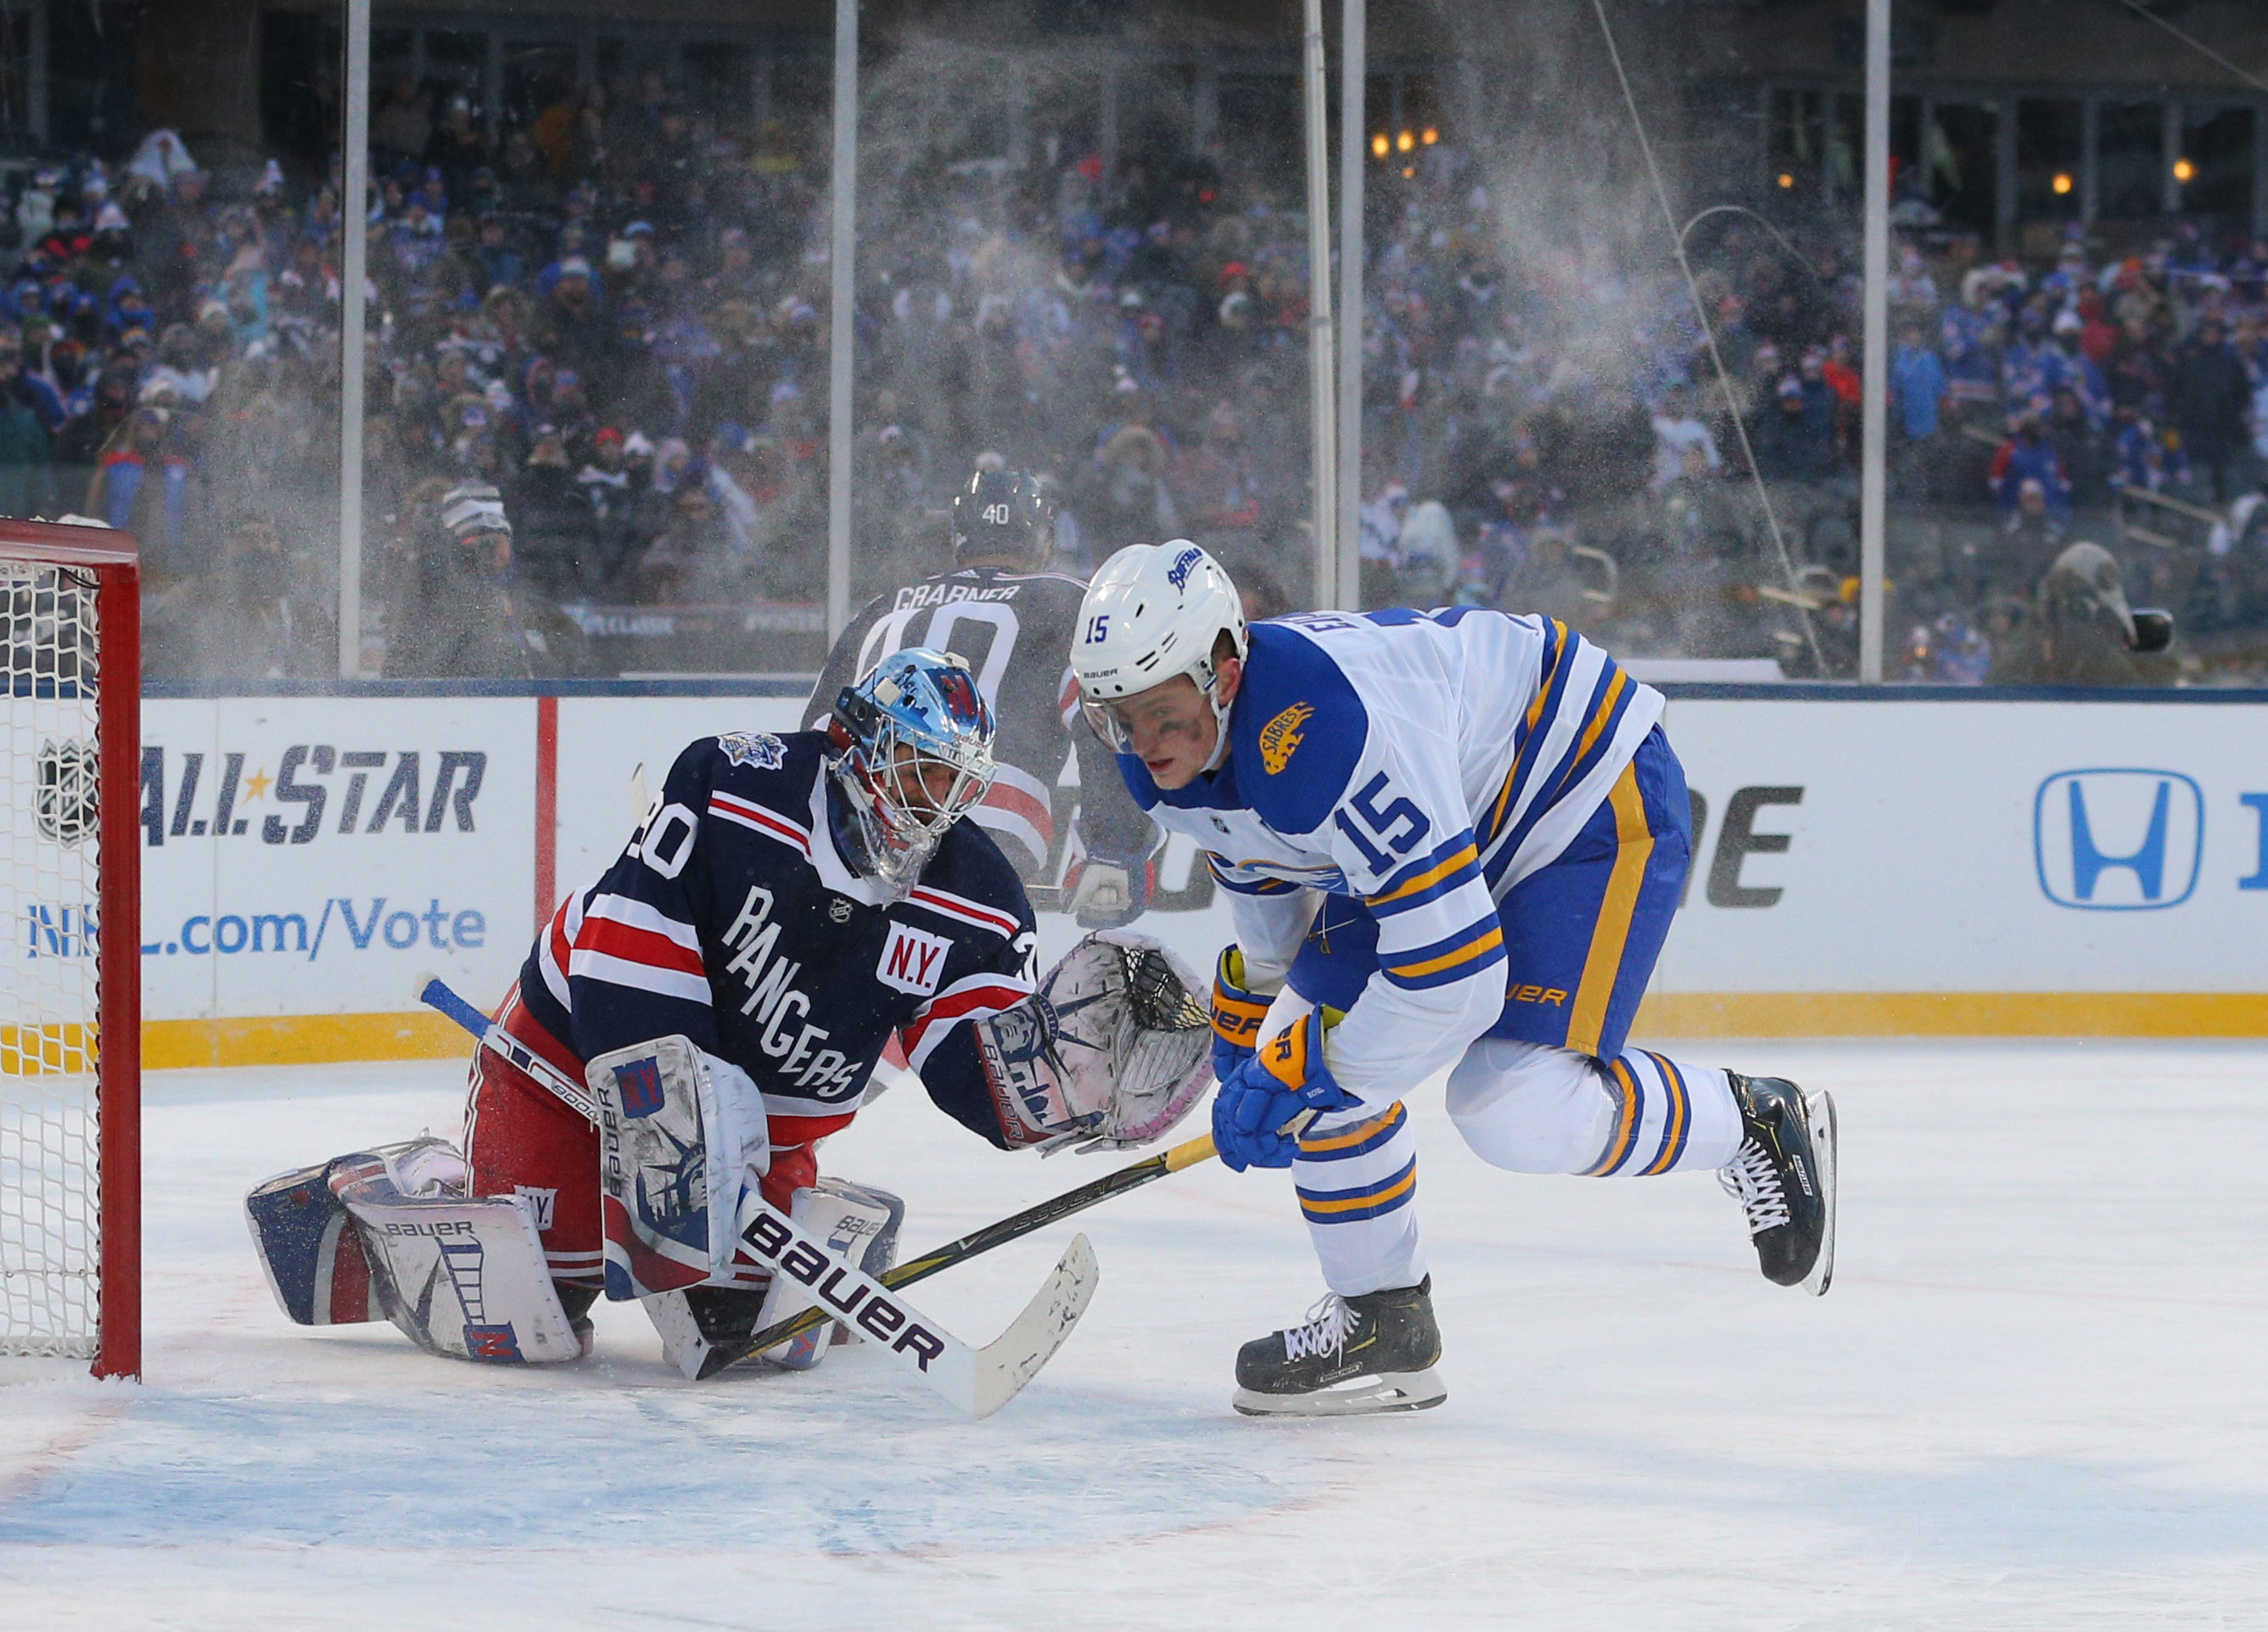 Miller's OT goal lifts Rangers past Sabres in Winter Classic